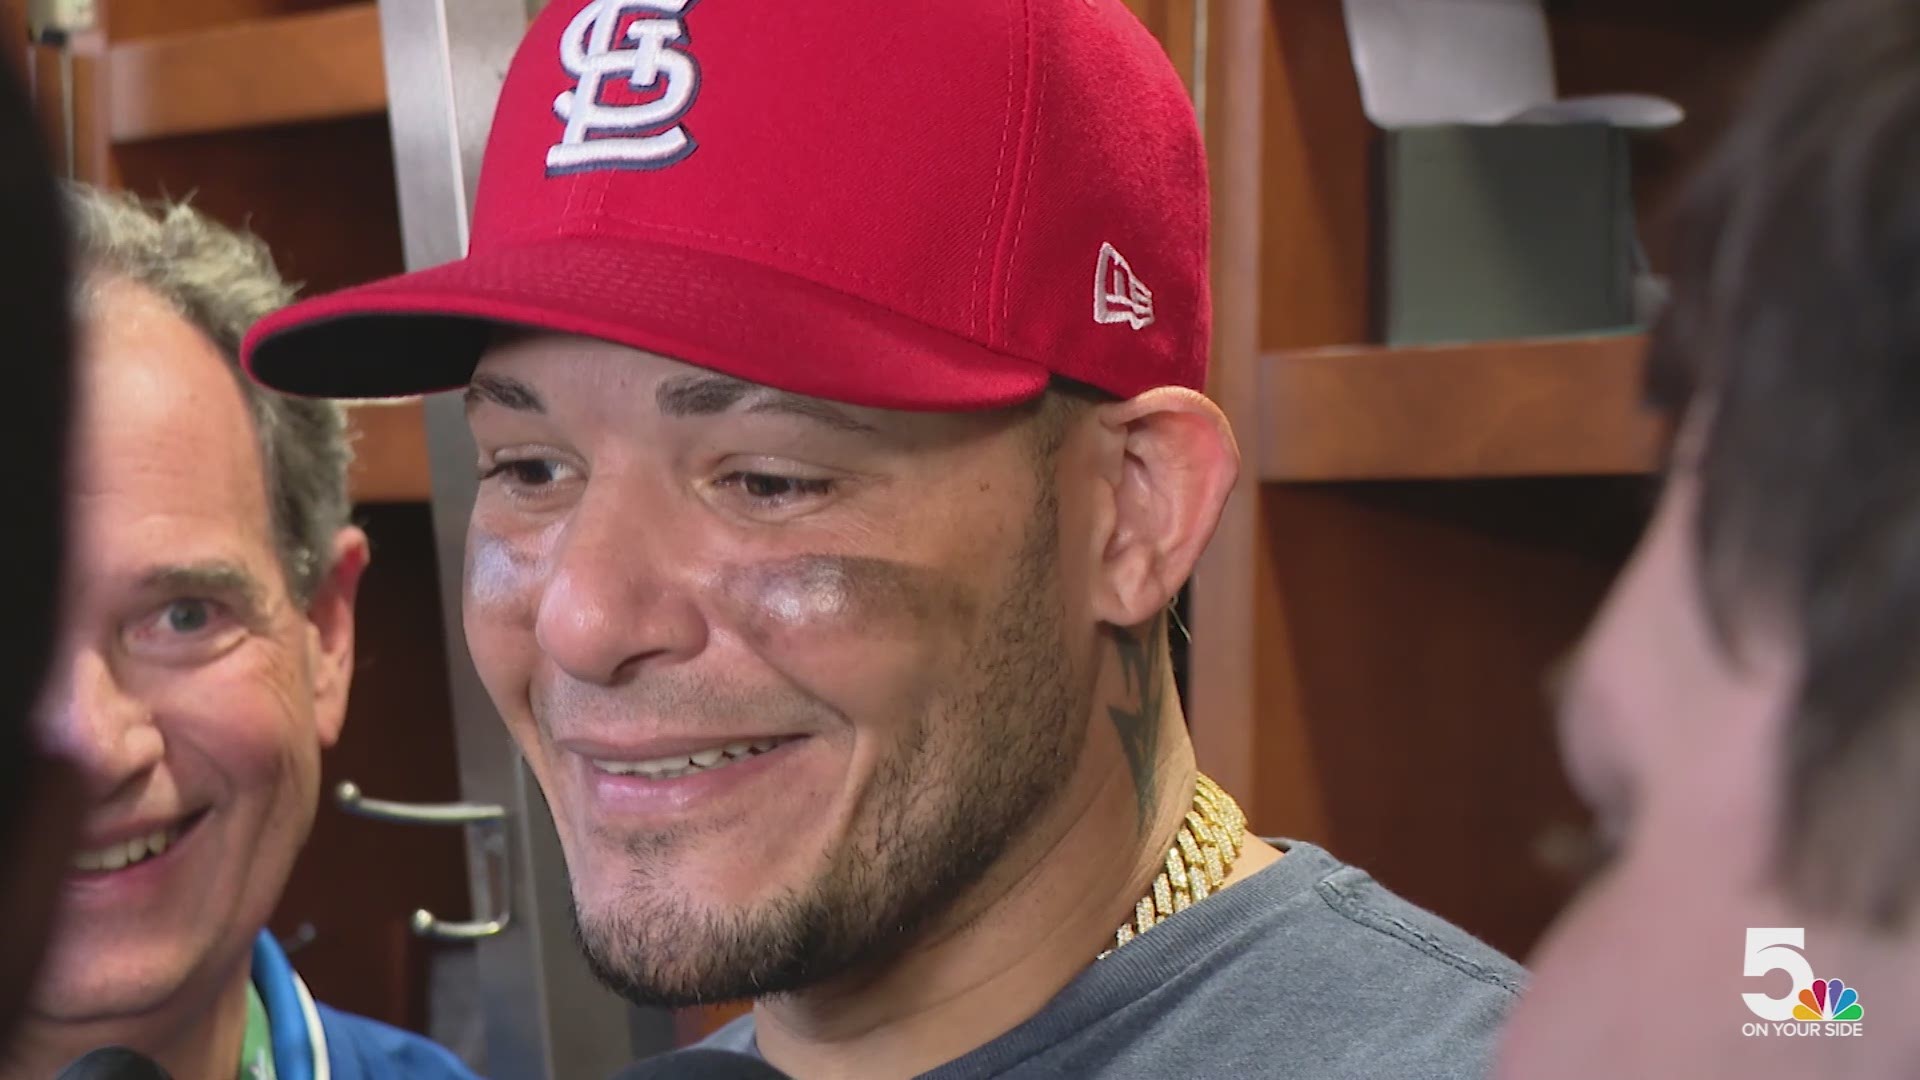 Molina came through again when his team needed him most.